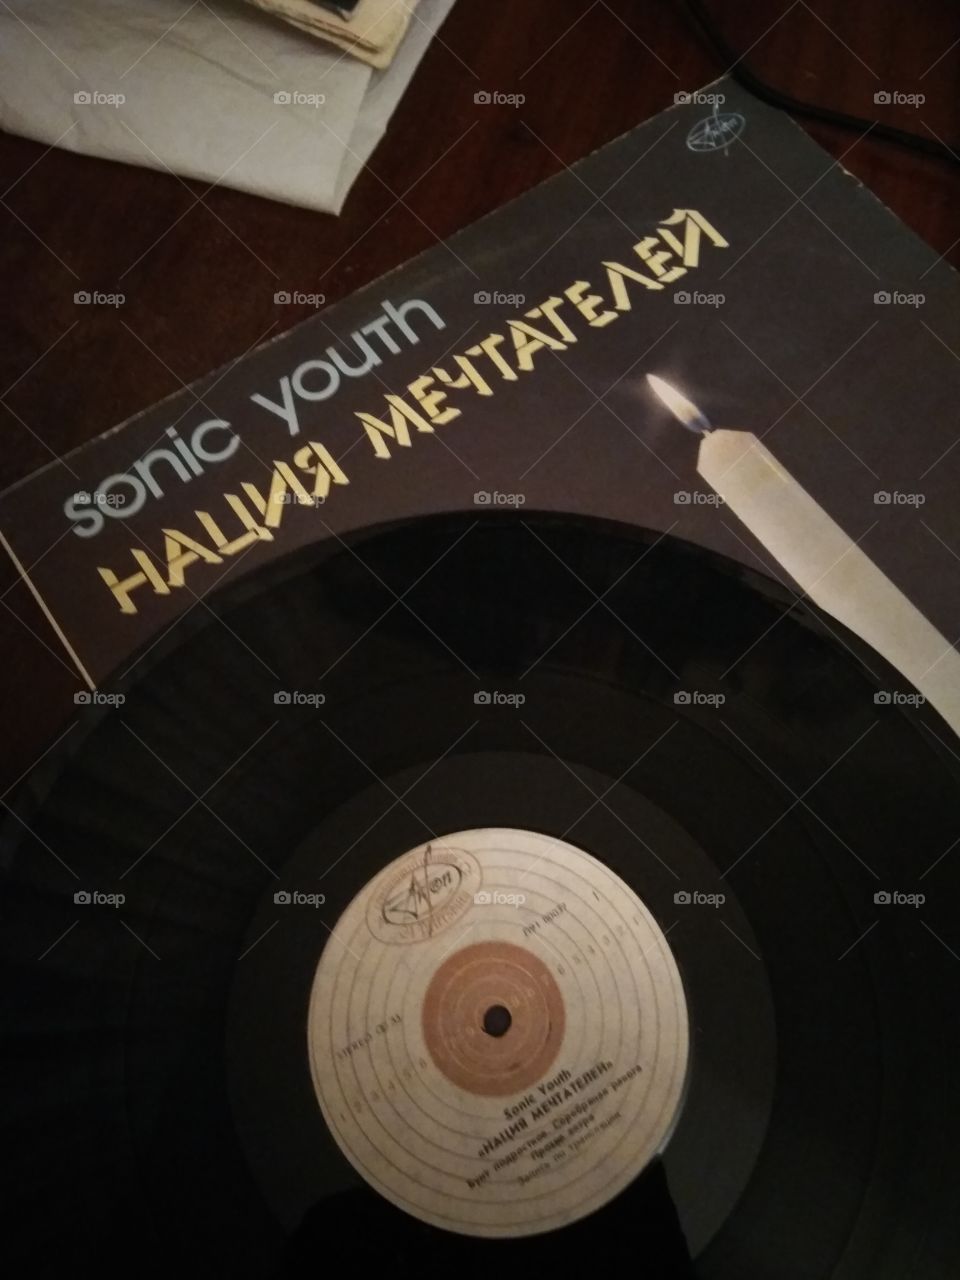 sonic youth vynil